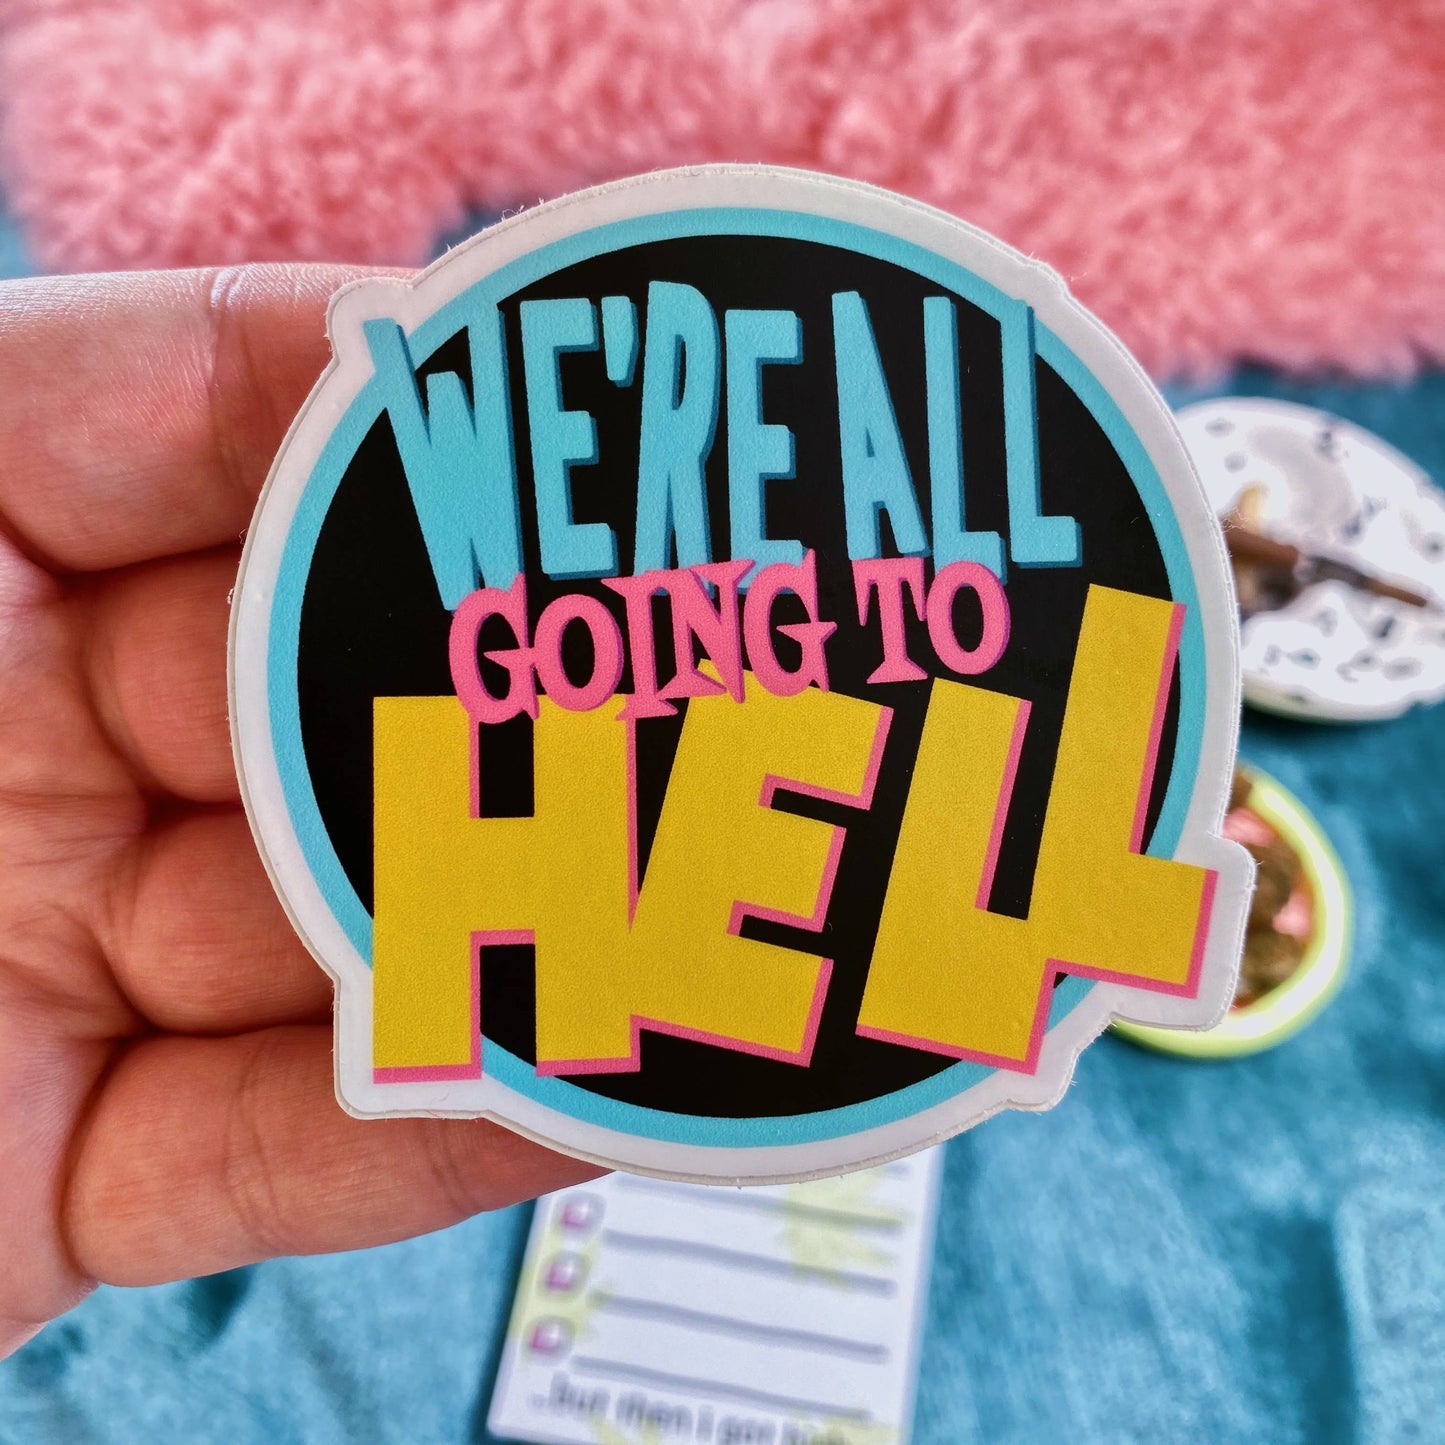 We're All Going To Hell Sticker